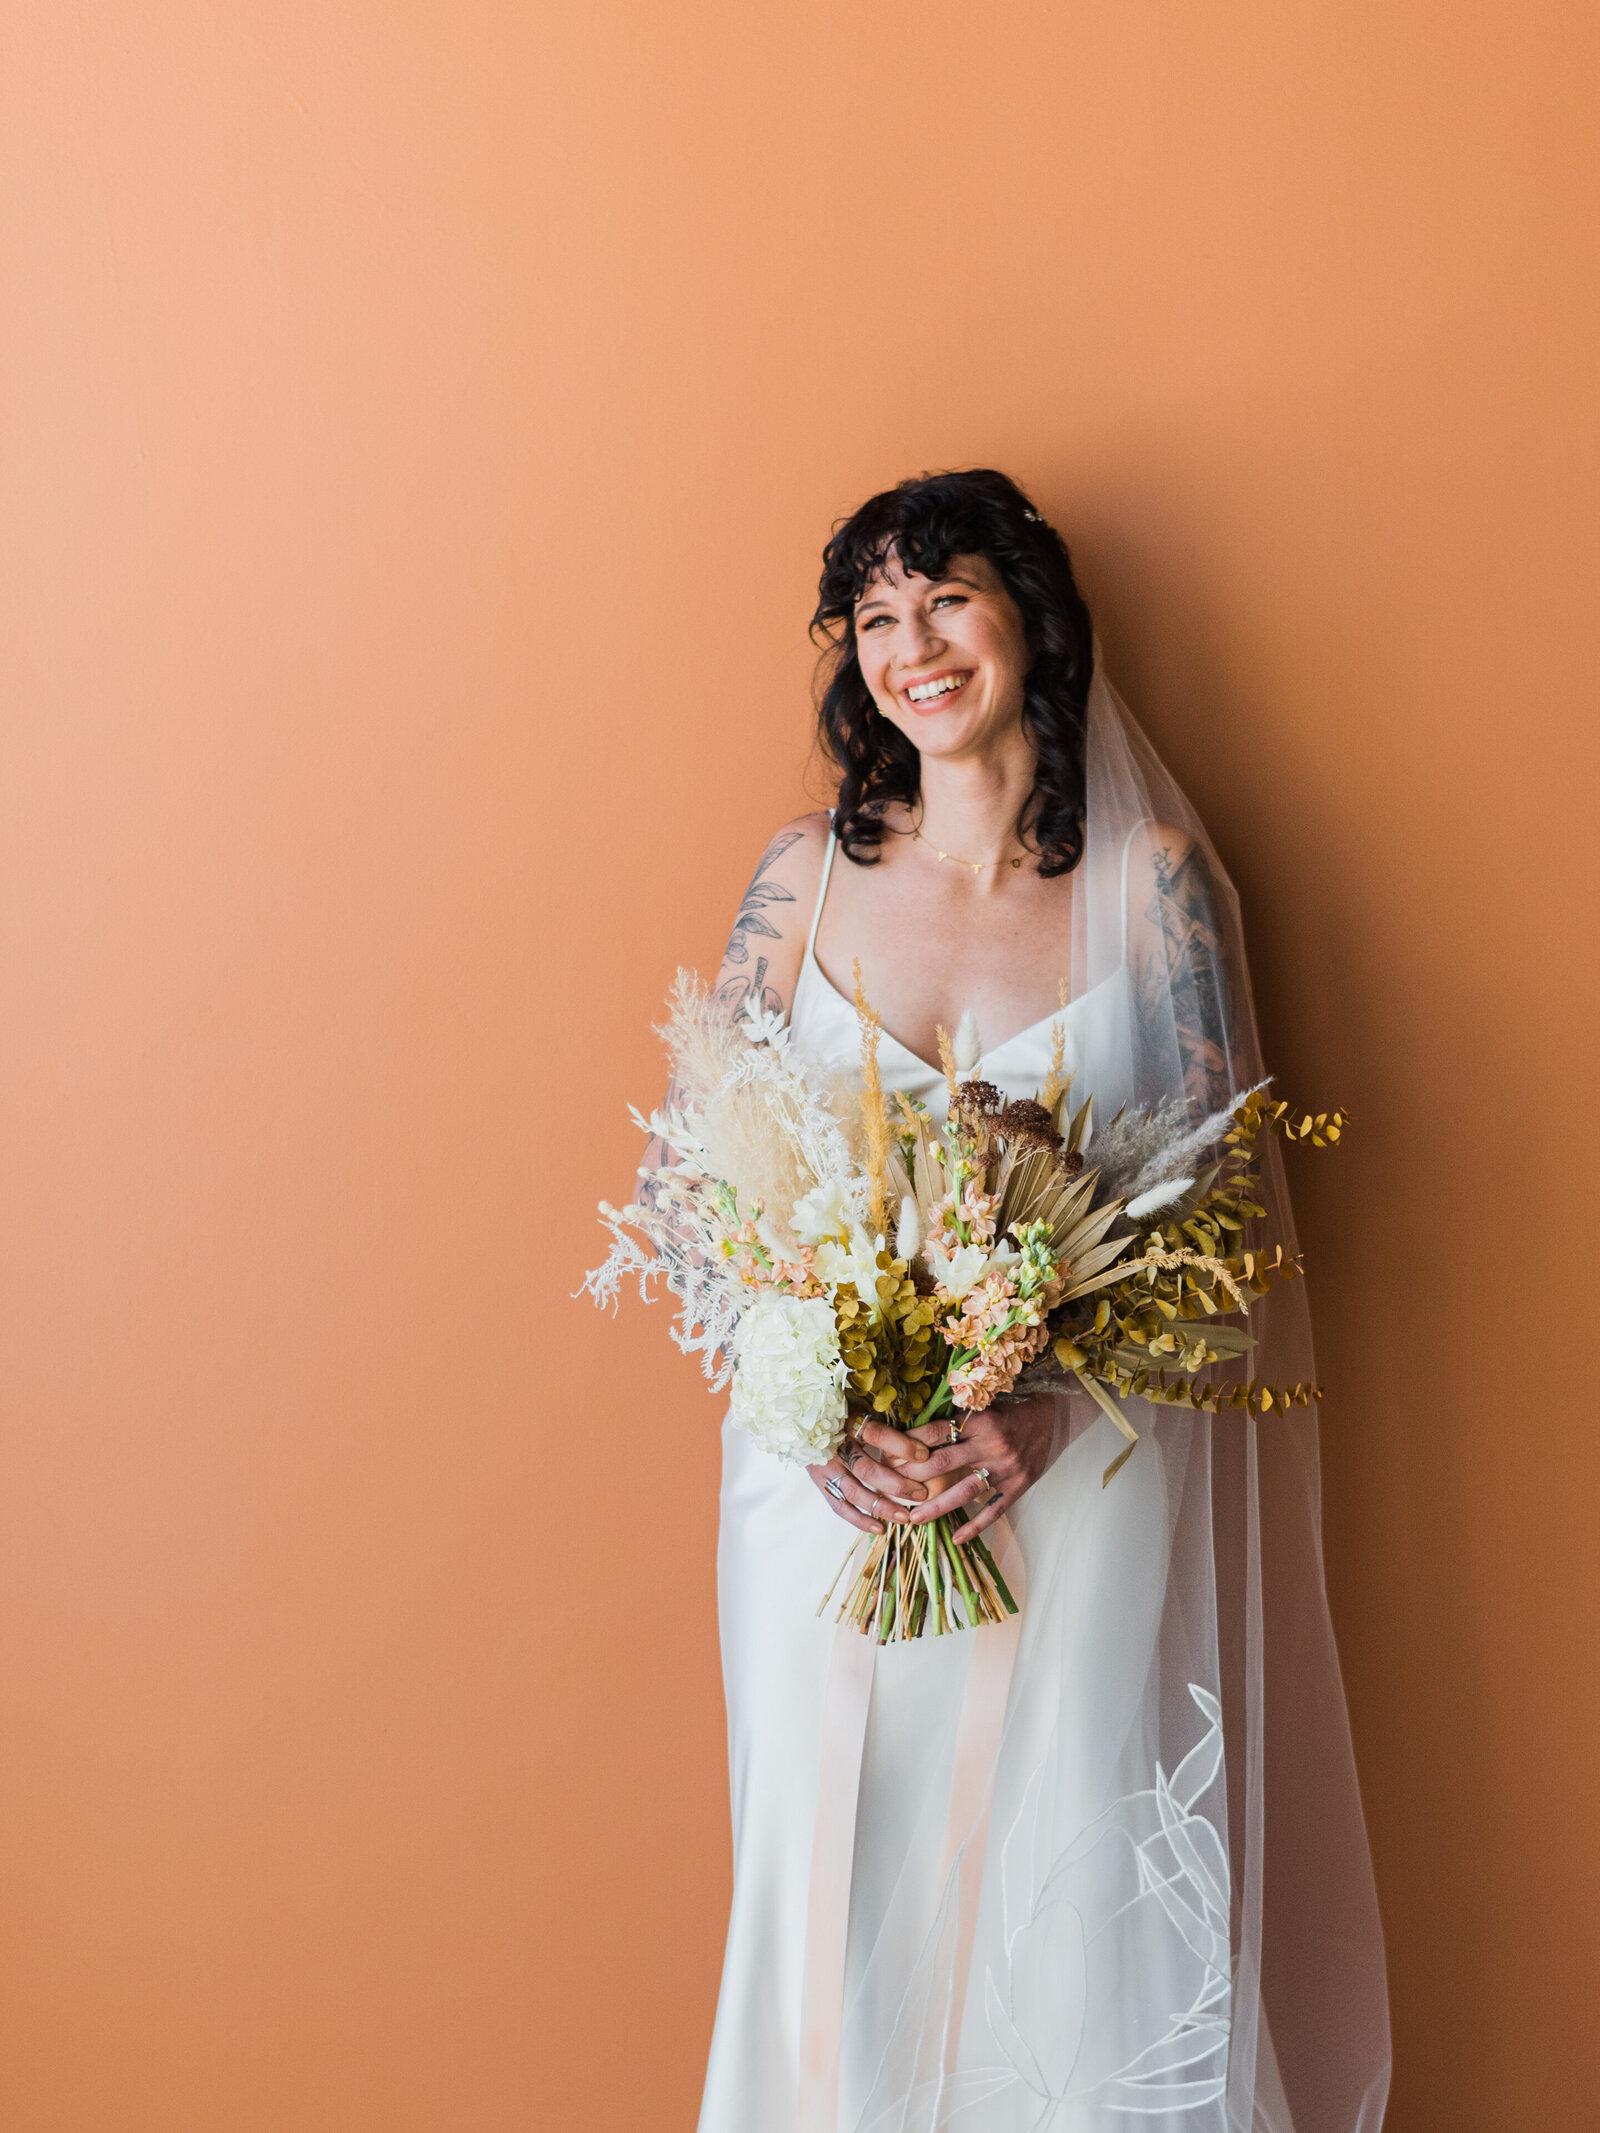 Bride laughing with bouquet of flowers